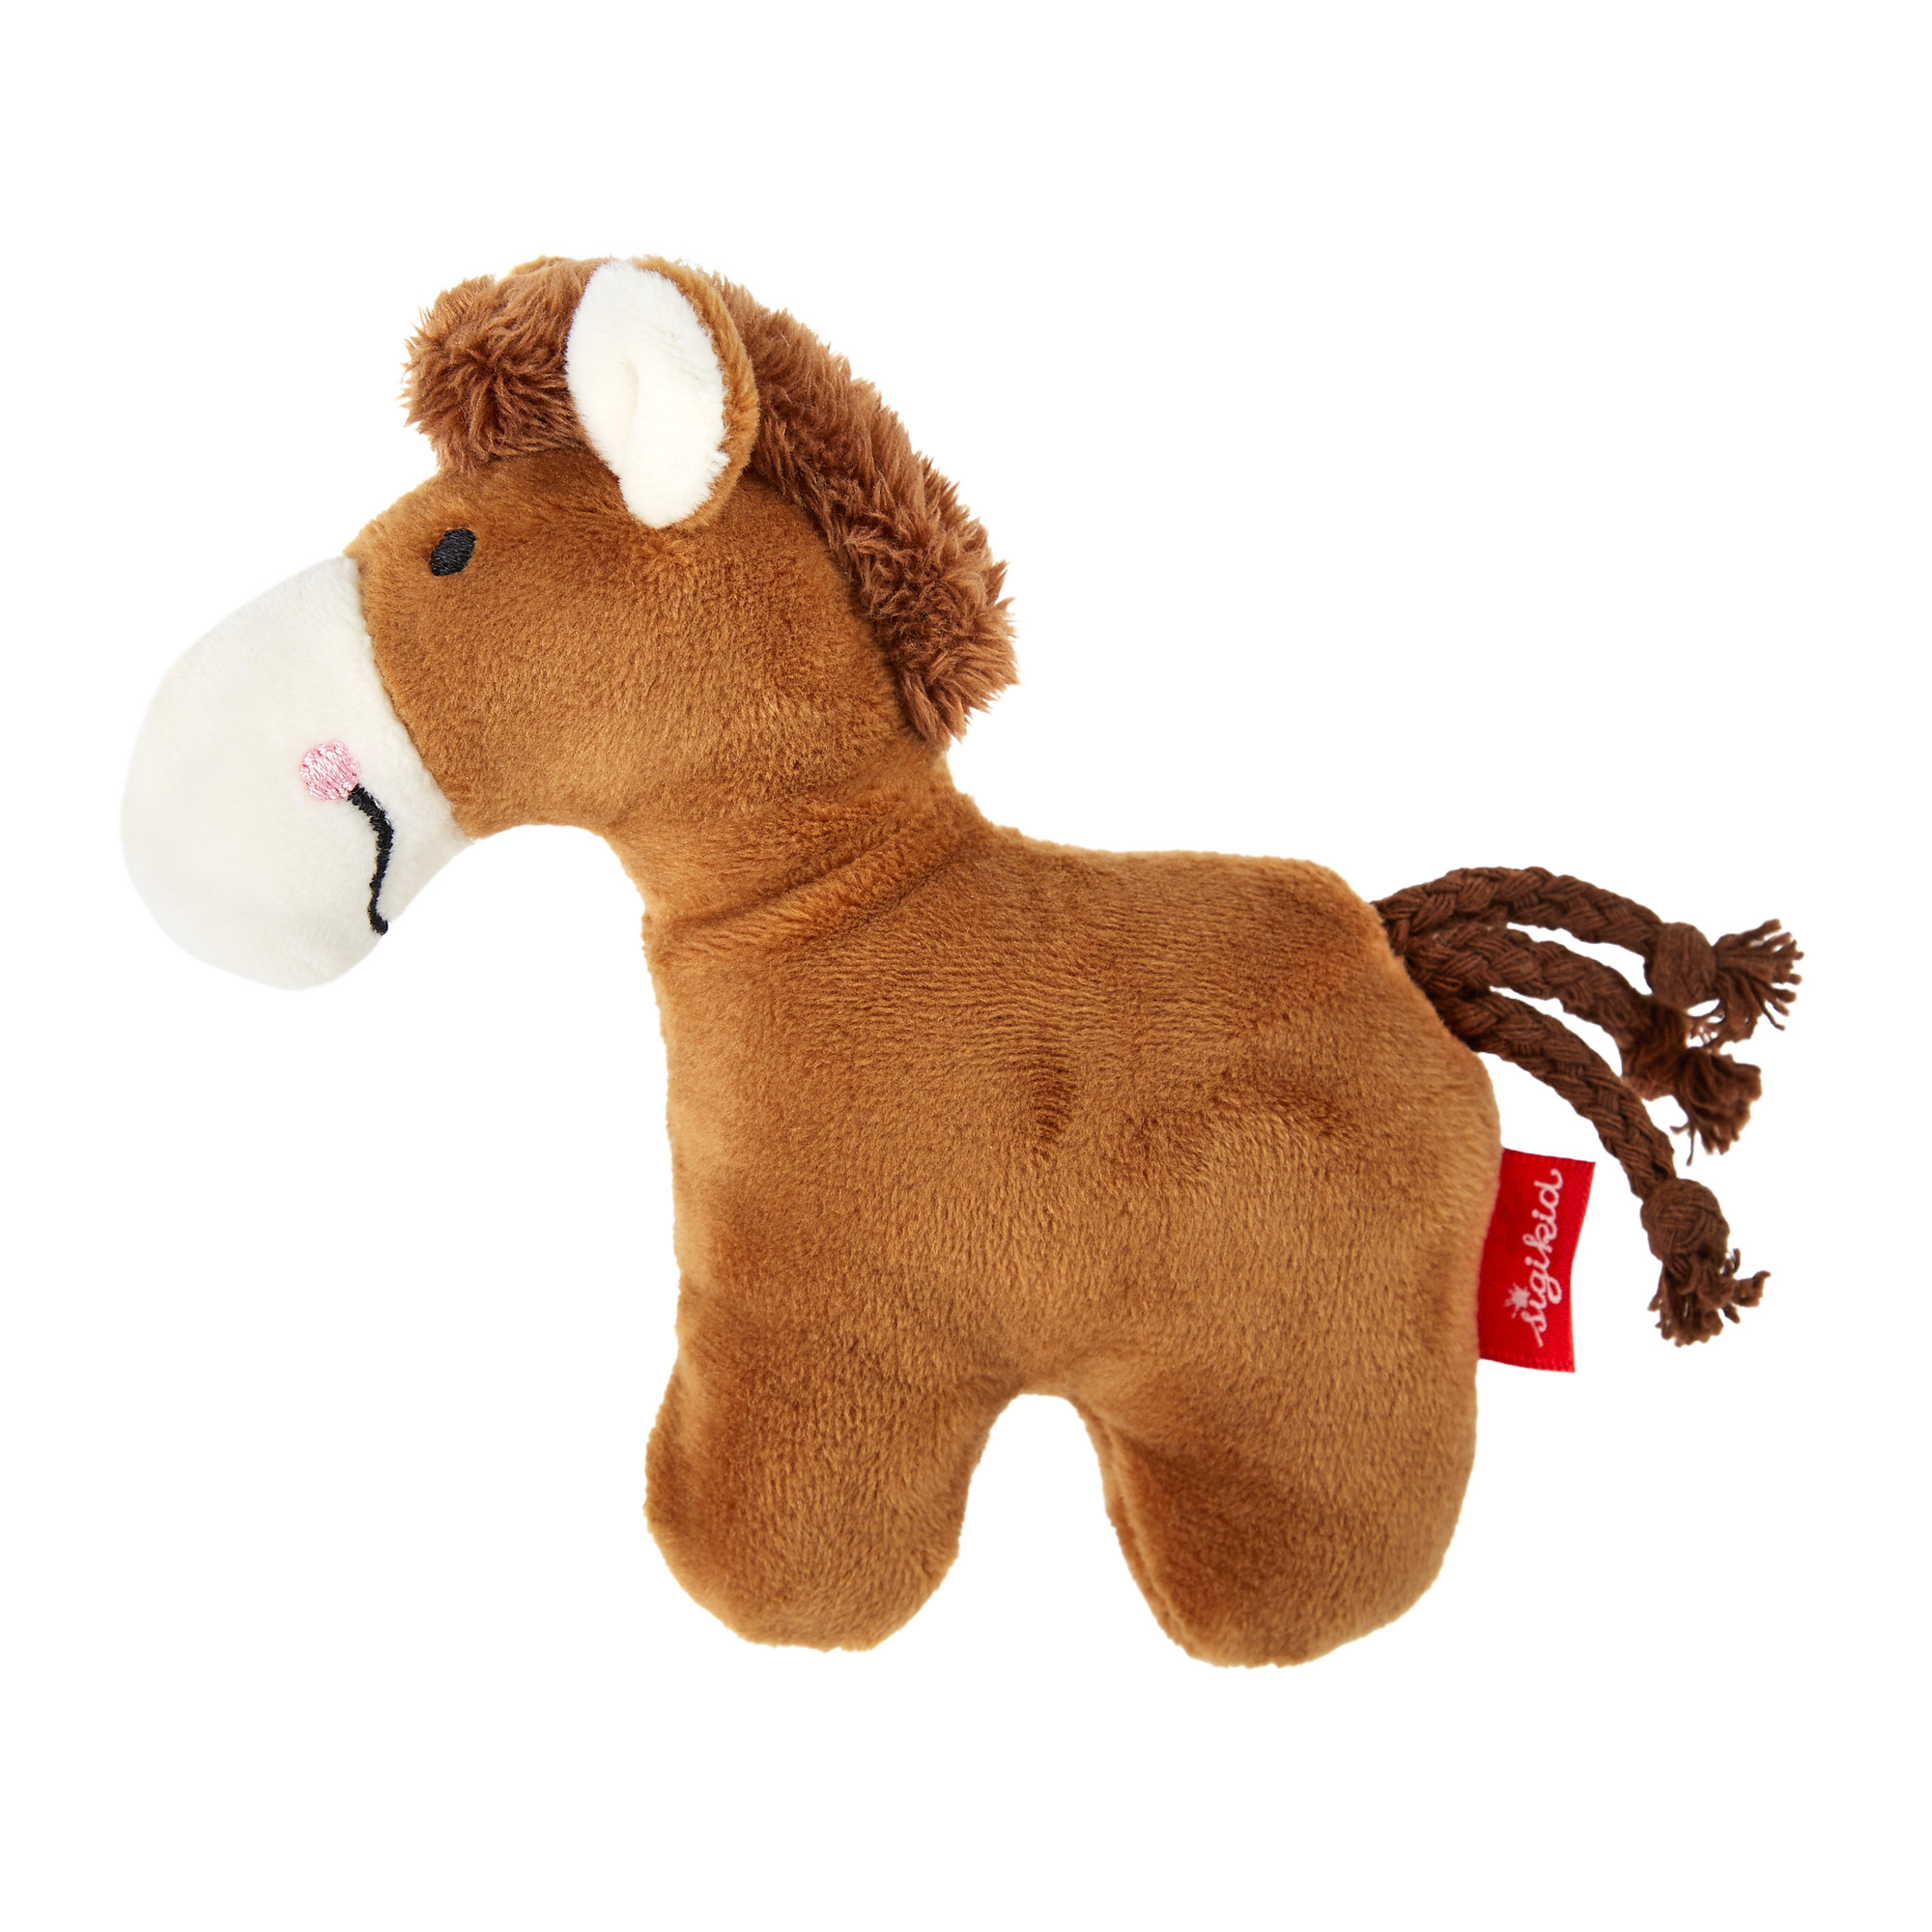 Soft brown pony rattle